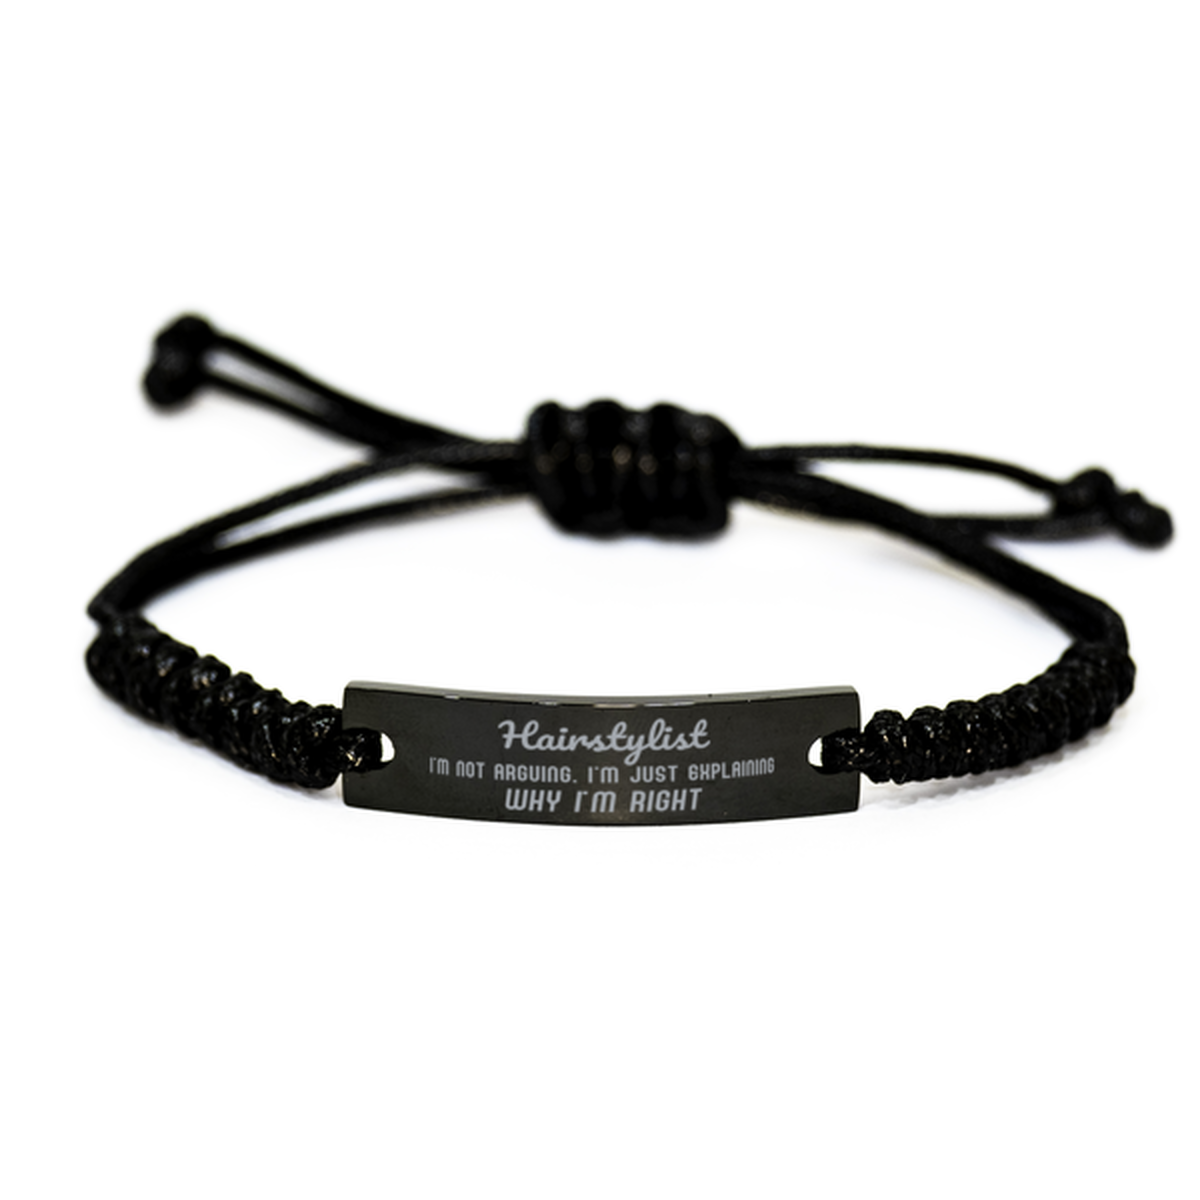 Hairstylist I'm not Arguing. I'm Just Explaining Why I'm RIGHT Black Rope Bracelet, Funny Saying Quote Hairstylist Gifts For Hairstylist Graduation Birthday Christmas Gifts for Men Women Coworker